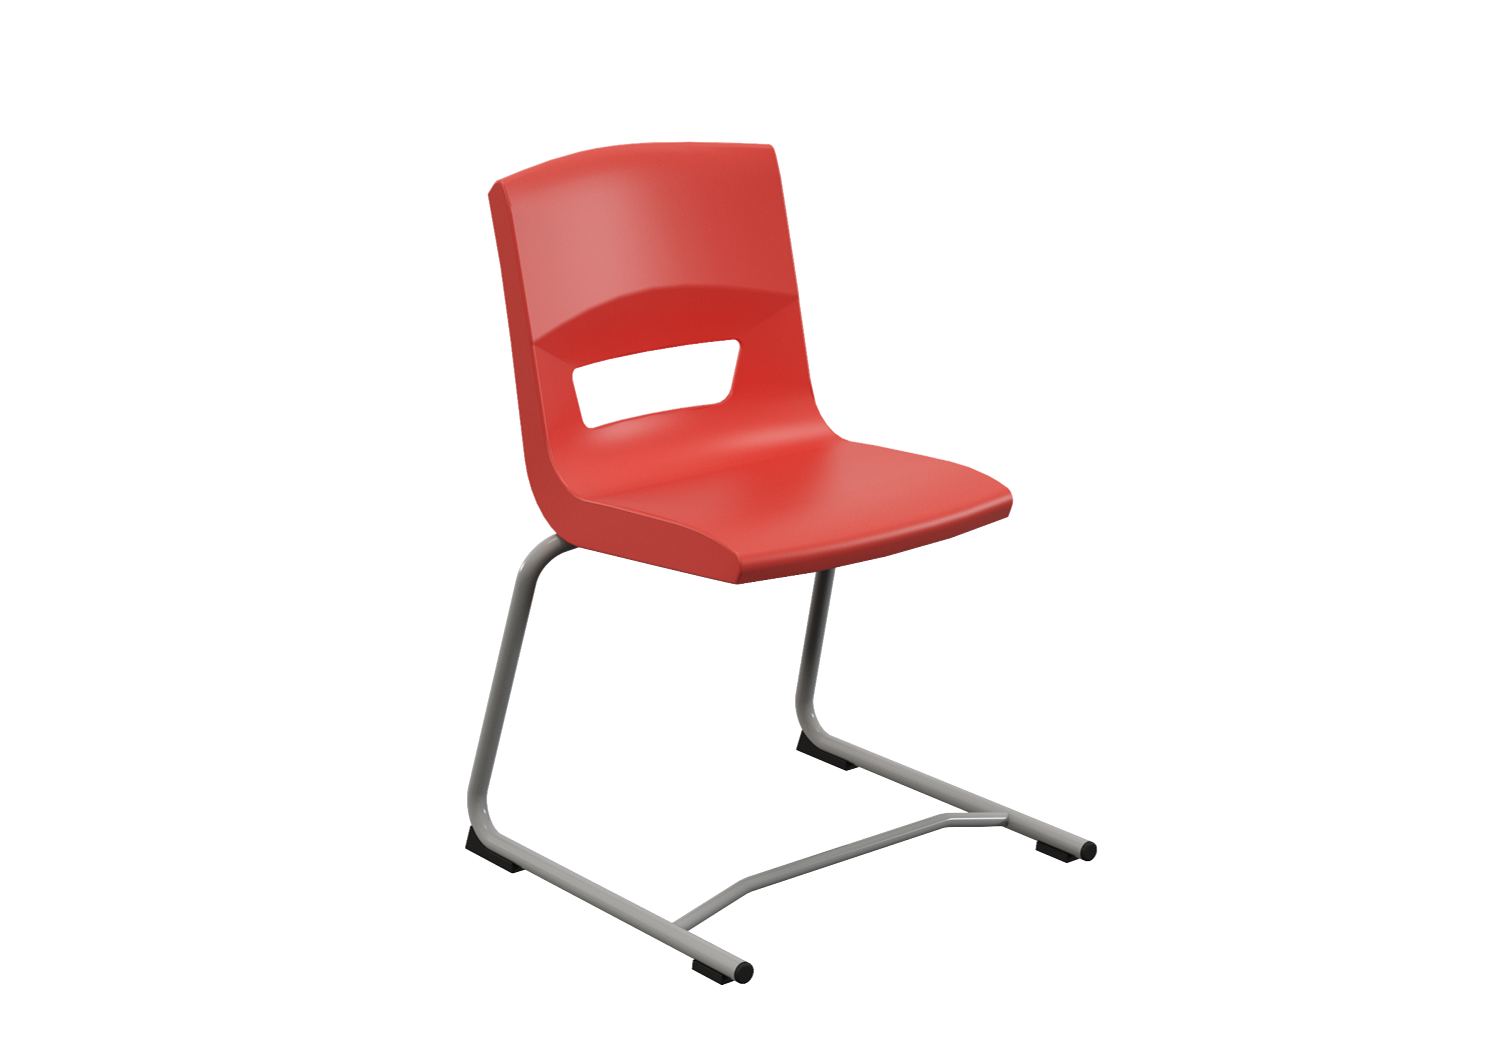 Postura reverse cantilevedr chair for classrom and kitchen poopy red